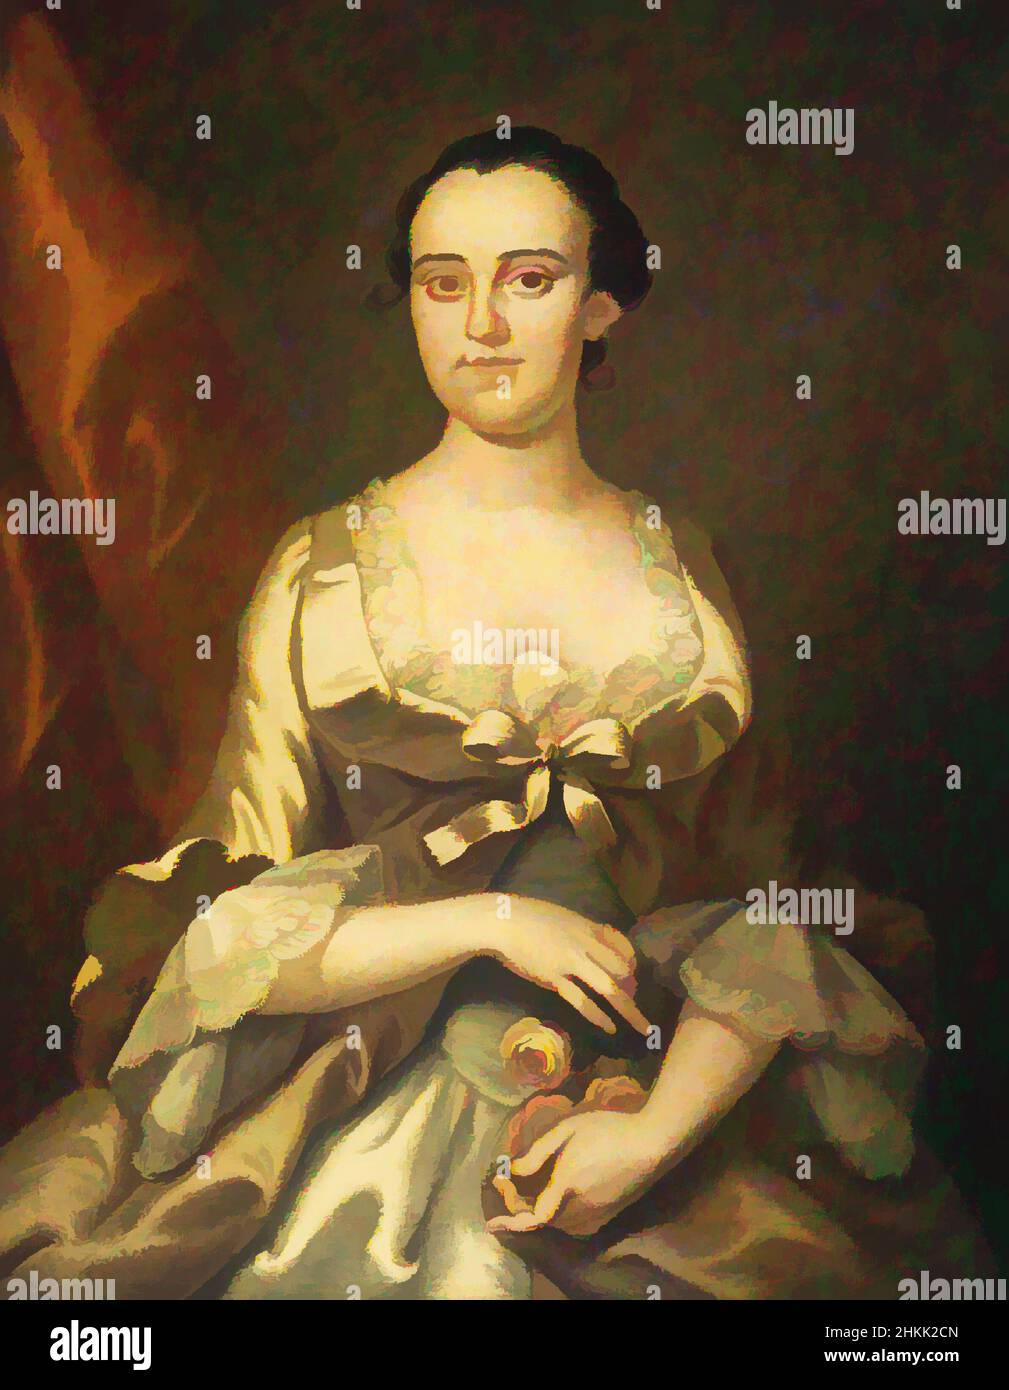 Art inspired by Mrs. William Allen, John Wollaston, ca. 1710-after 1775, Oil on canvas, ca. 1756, 35 7/8 x 28 5/8 in., 91.2 x 72.7 cm, American art, Colonial American lady, female figure, mid 18th century women's costume, oil on canvas, painting, portrait, Pre-revolutionary portrait, Classic works modernized by Artotop with a splash of modernity. Shapes, color and value, eye-catching visual impact on art. Emotions through freedom of artworks in a contemporary way. A timeless message pursuing a wildly creative new direction. Artists turning to the digital medium and creating the Artotop NFT Stock Photo